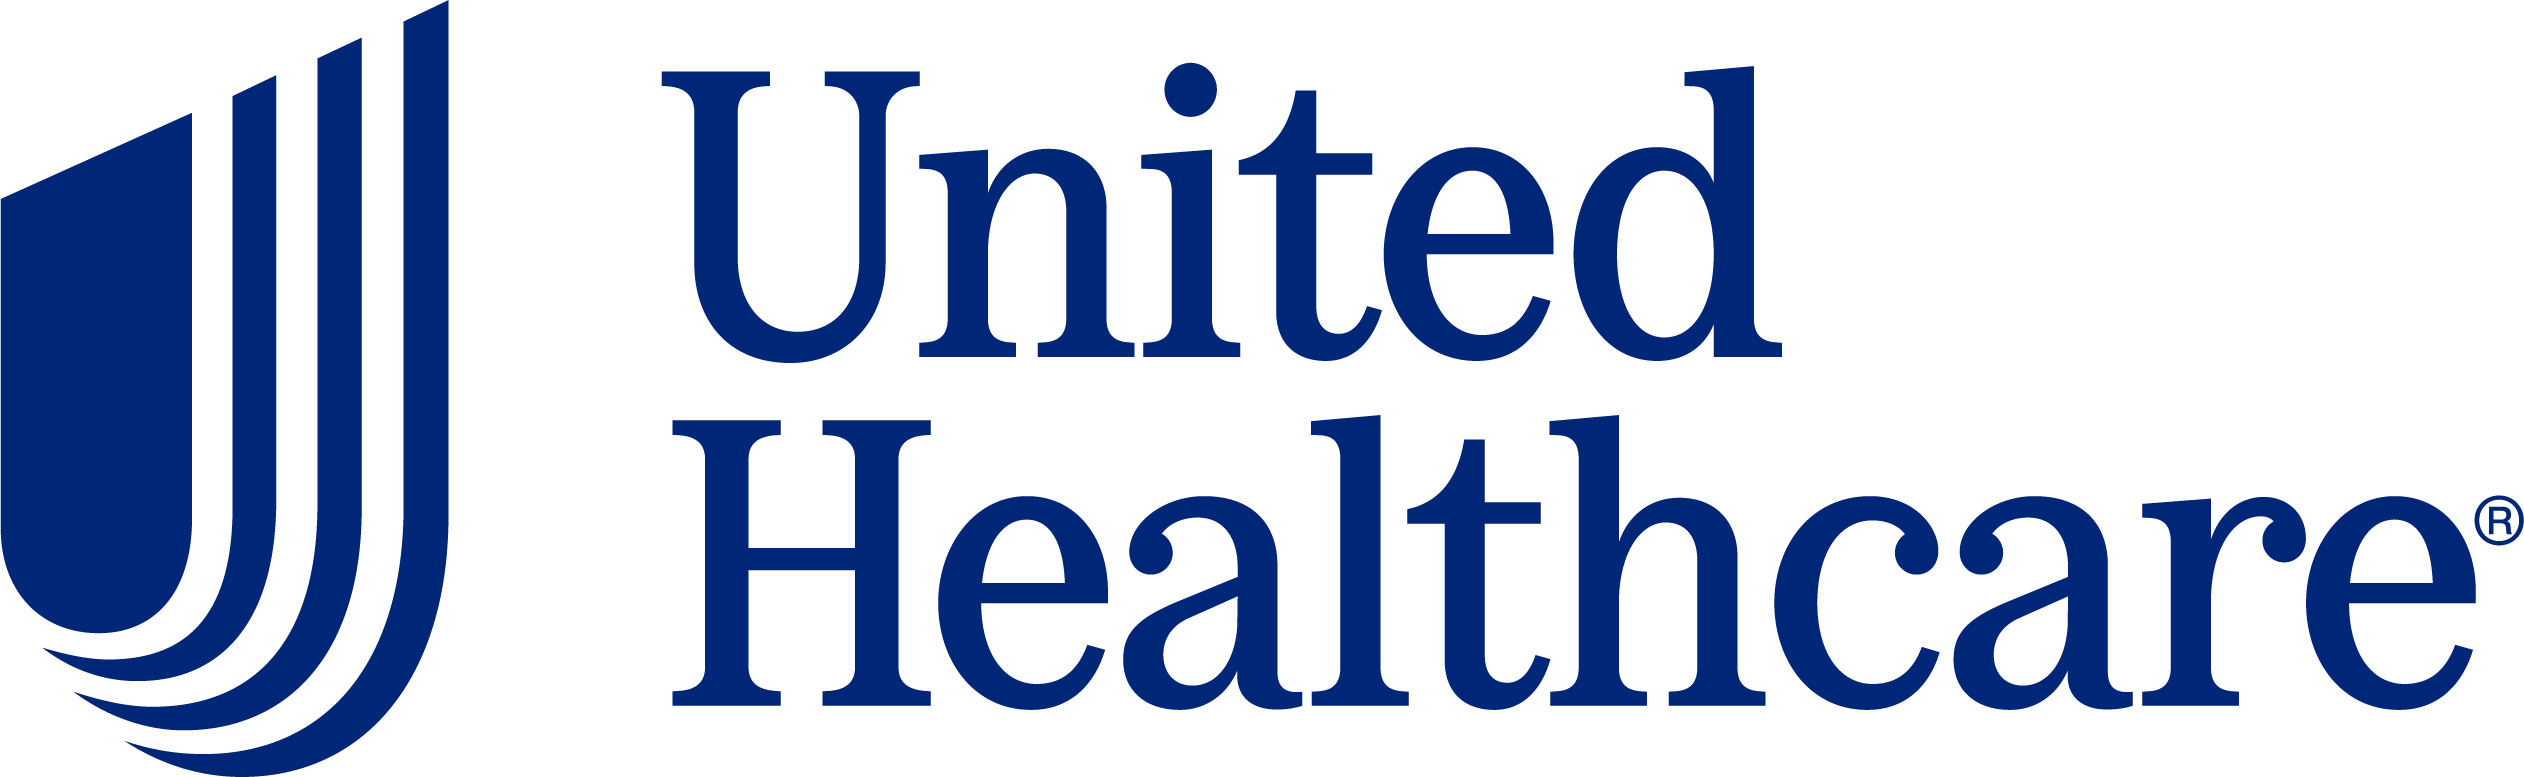 Healthy Benefits Plus Sponsored by UnitedHealthcare